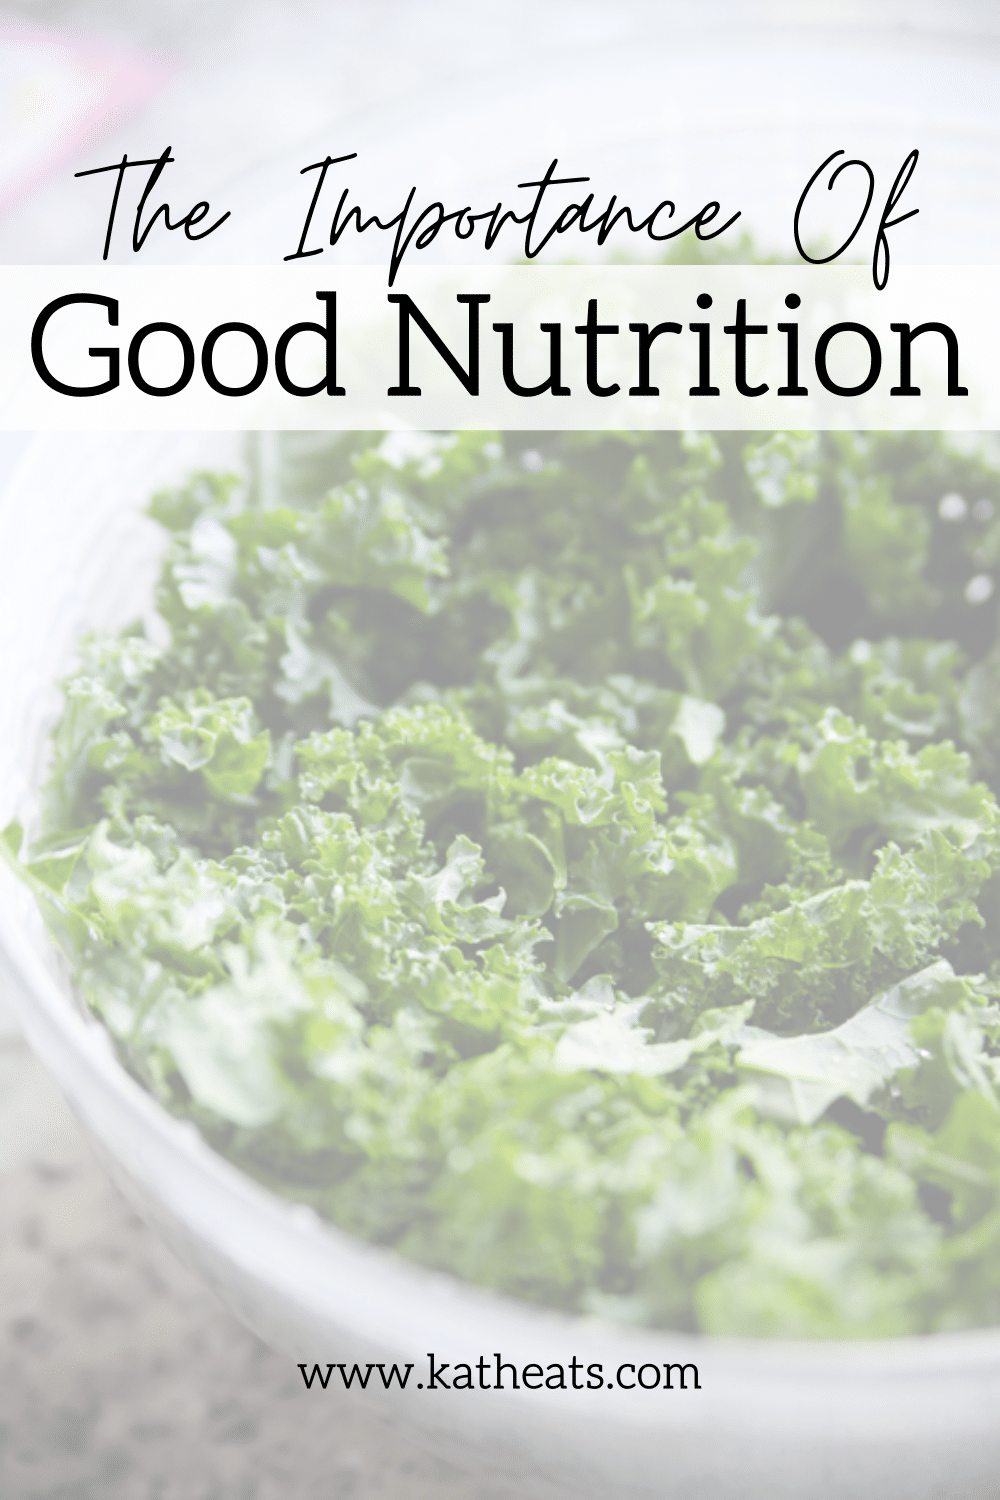 The Importance of Good Nutrition: bowl of raw kale with text overlay.